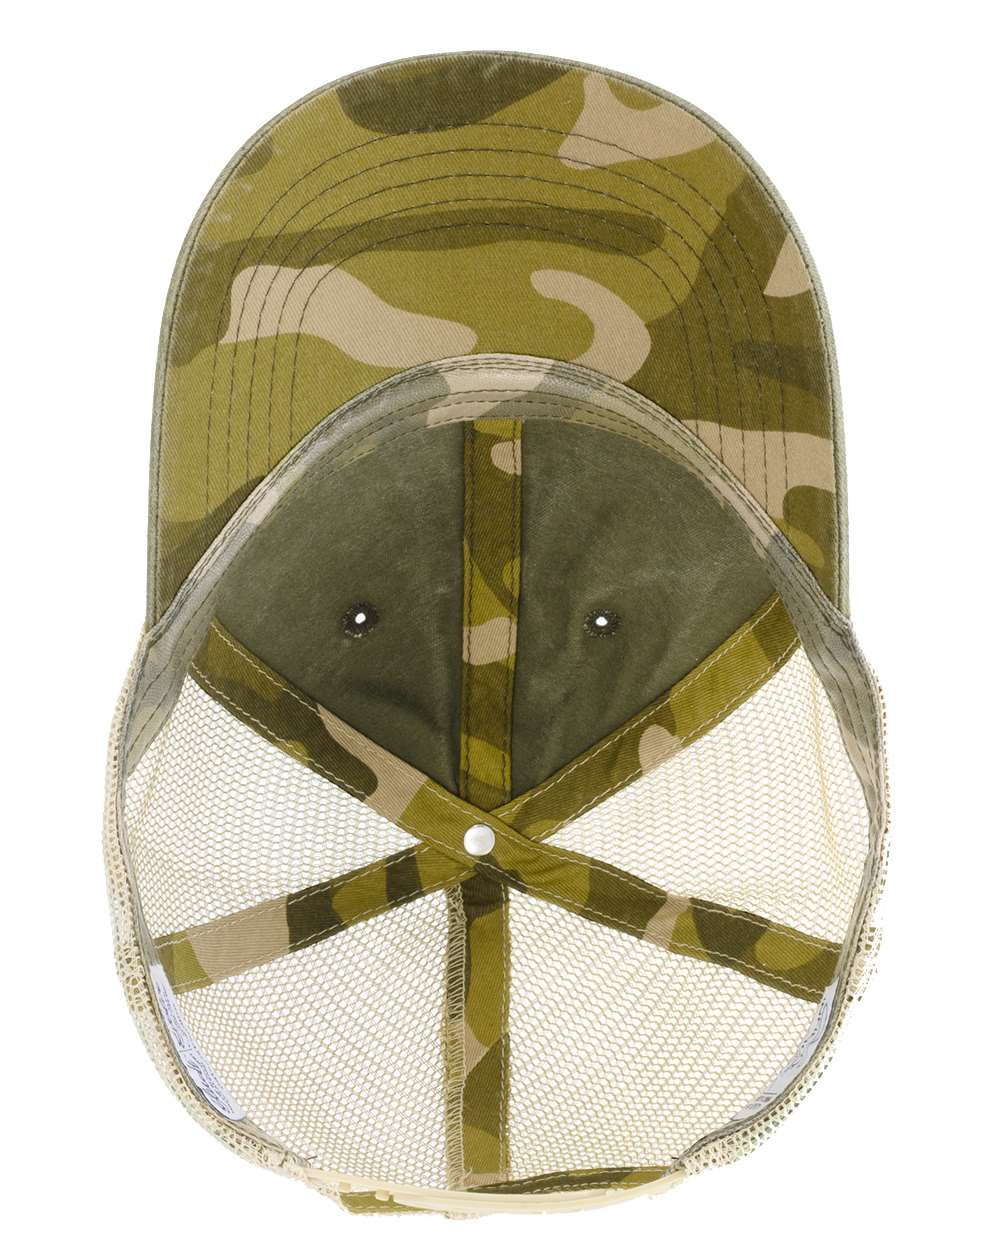 Montana Love embroidered olive camo ponytail hat